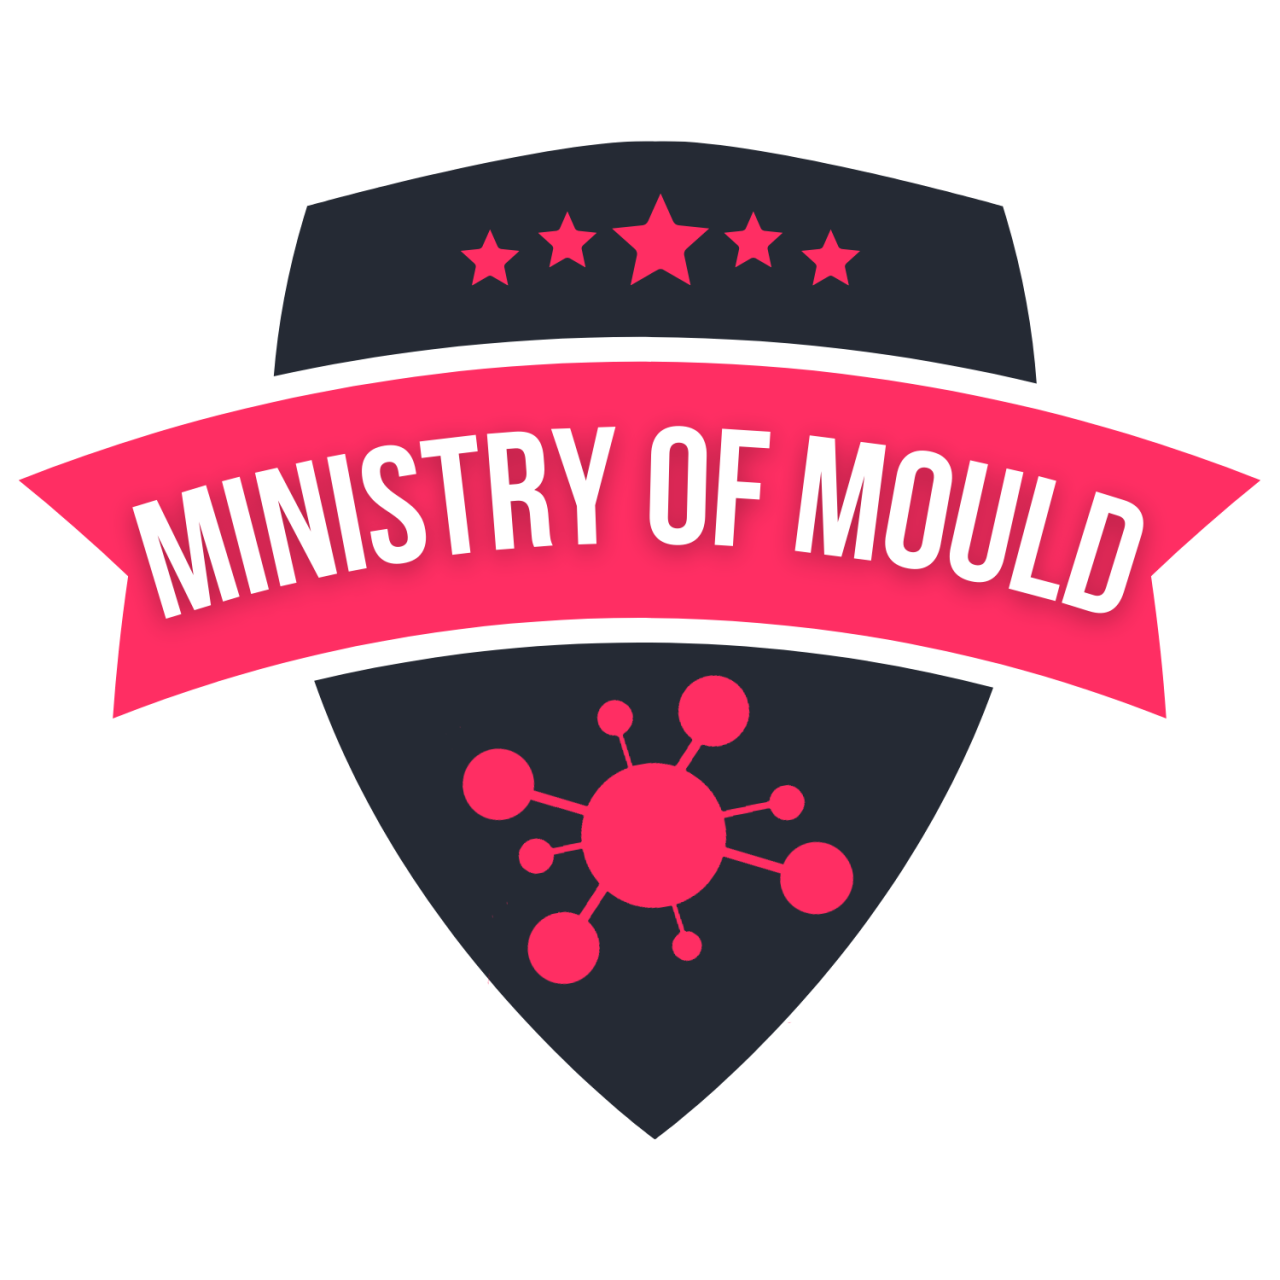 Ministry of Mould